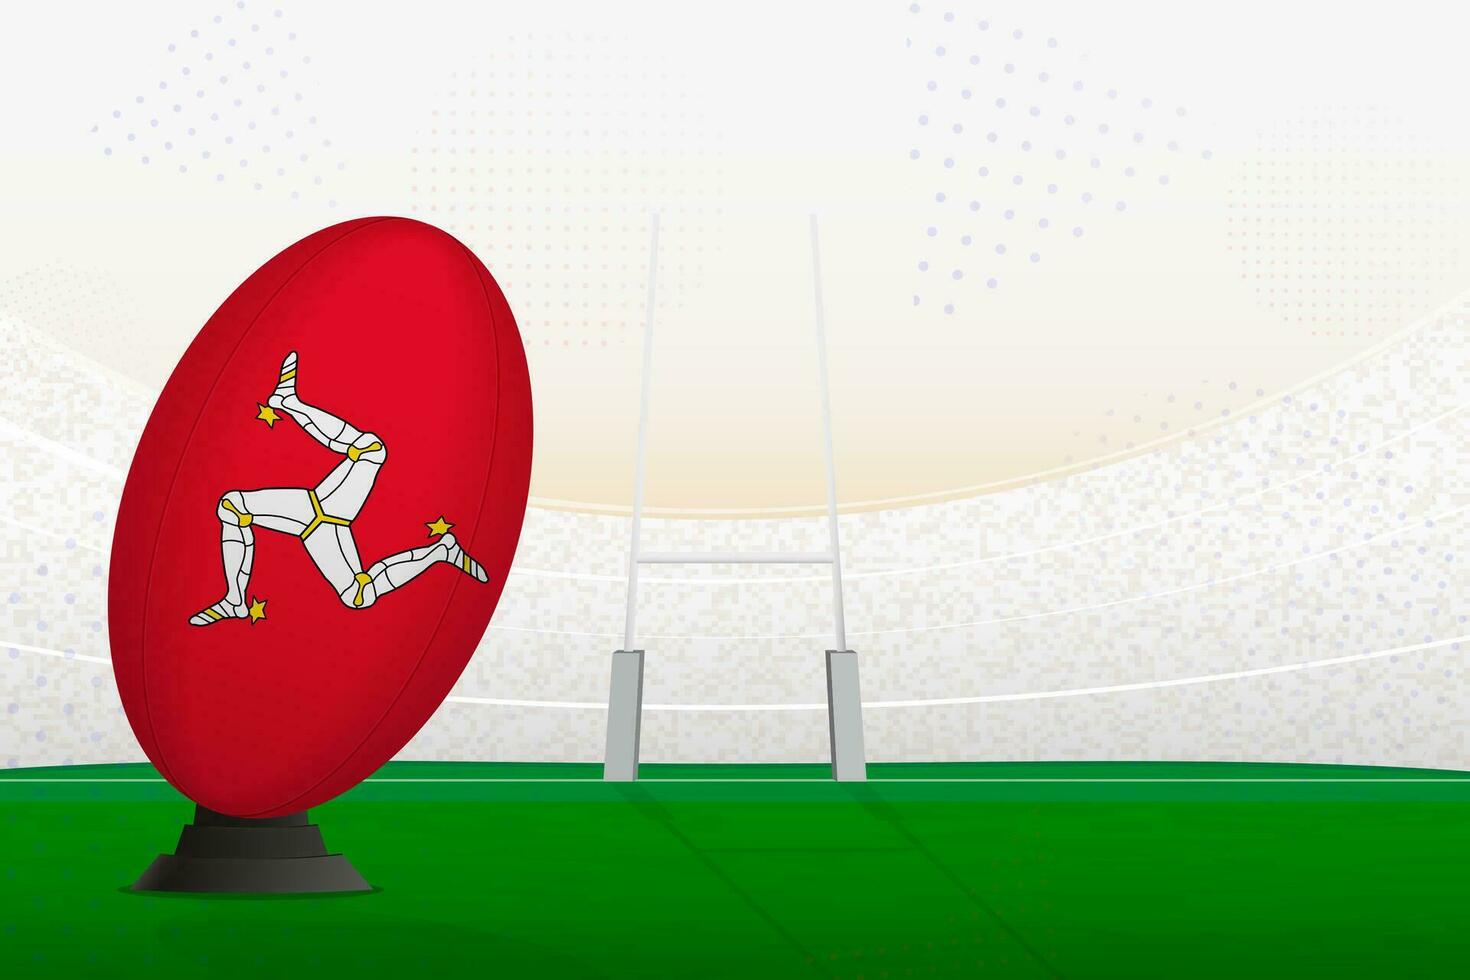 Isle of Man national team rugby ball on rugby stadium and goal posts, preparing for a penalty or free kick. vector